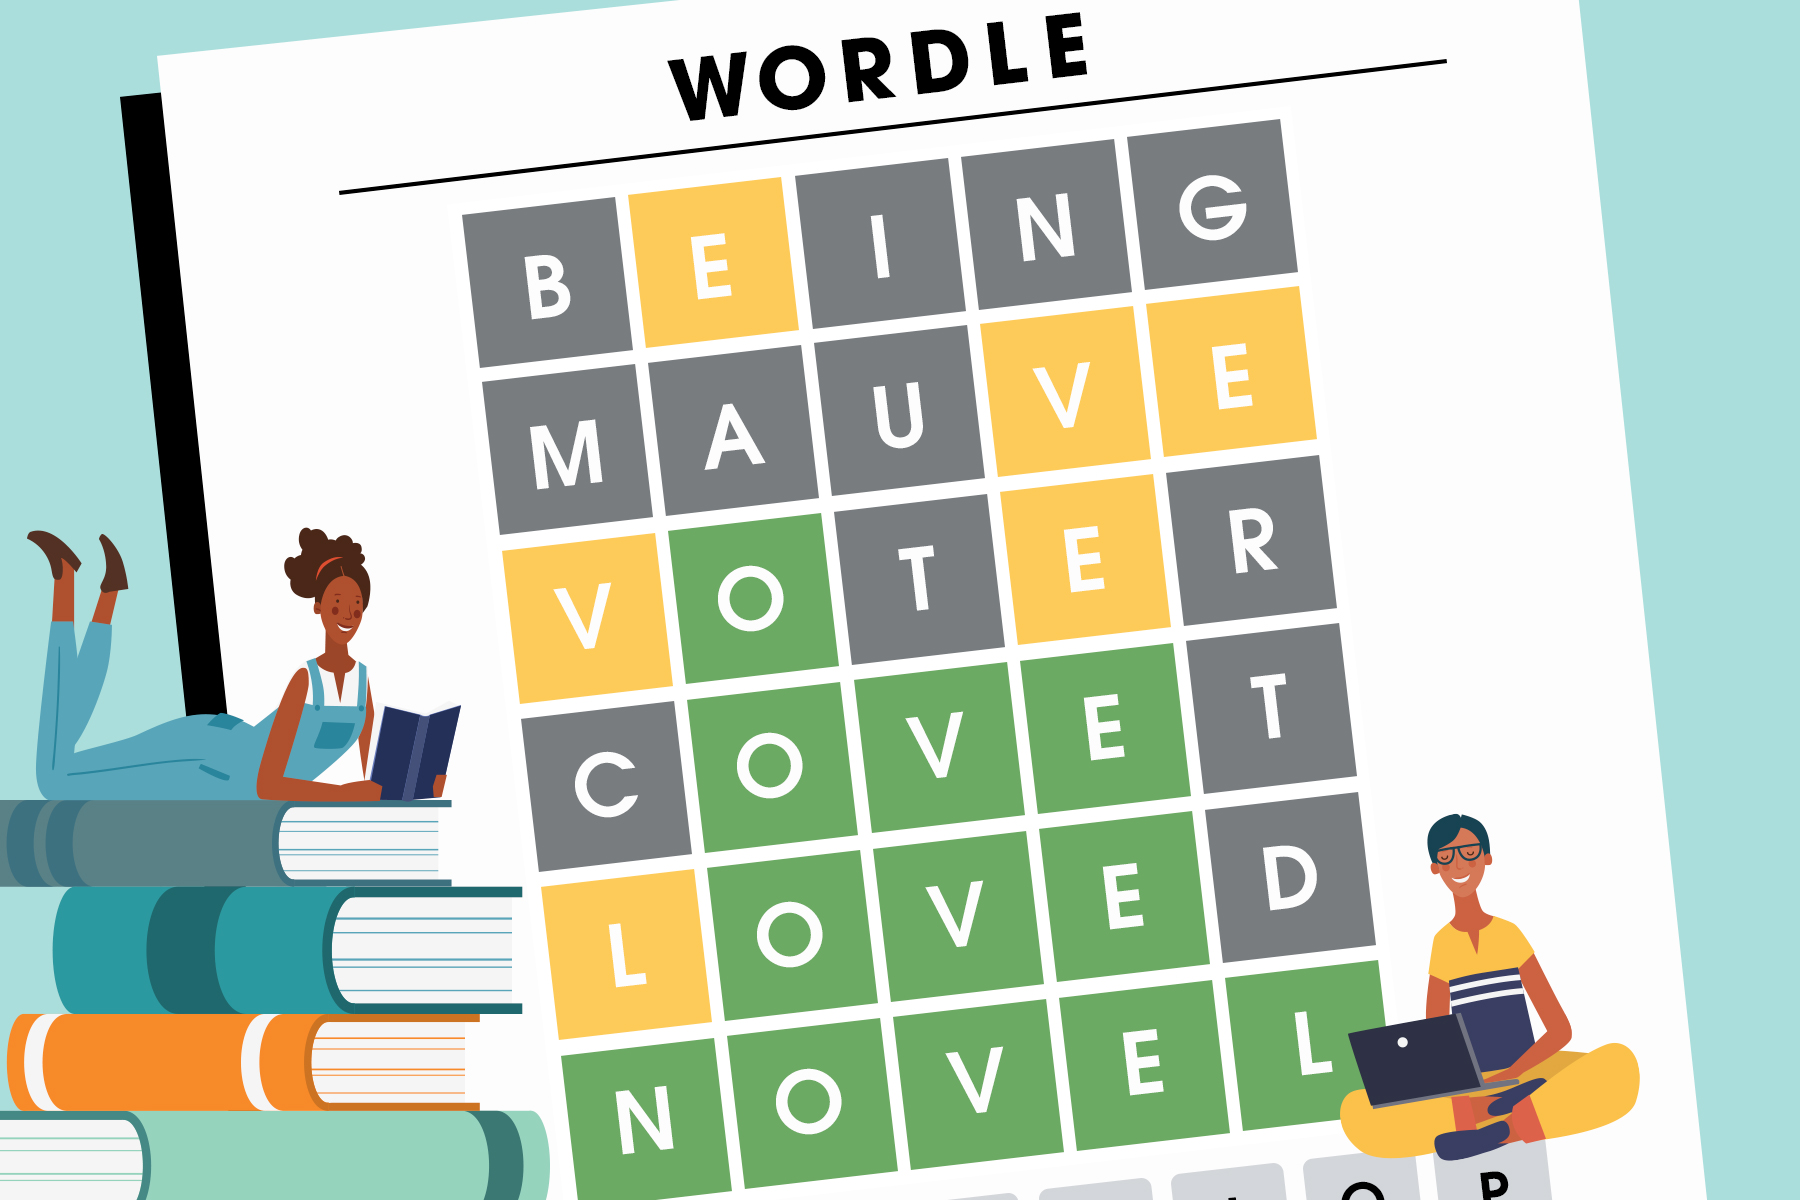 A completed Wordle puzzle, spelling 'novel', with people playing it on either side